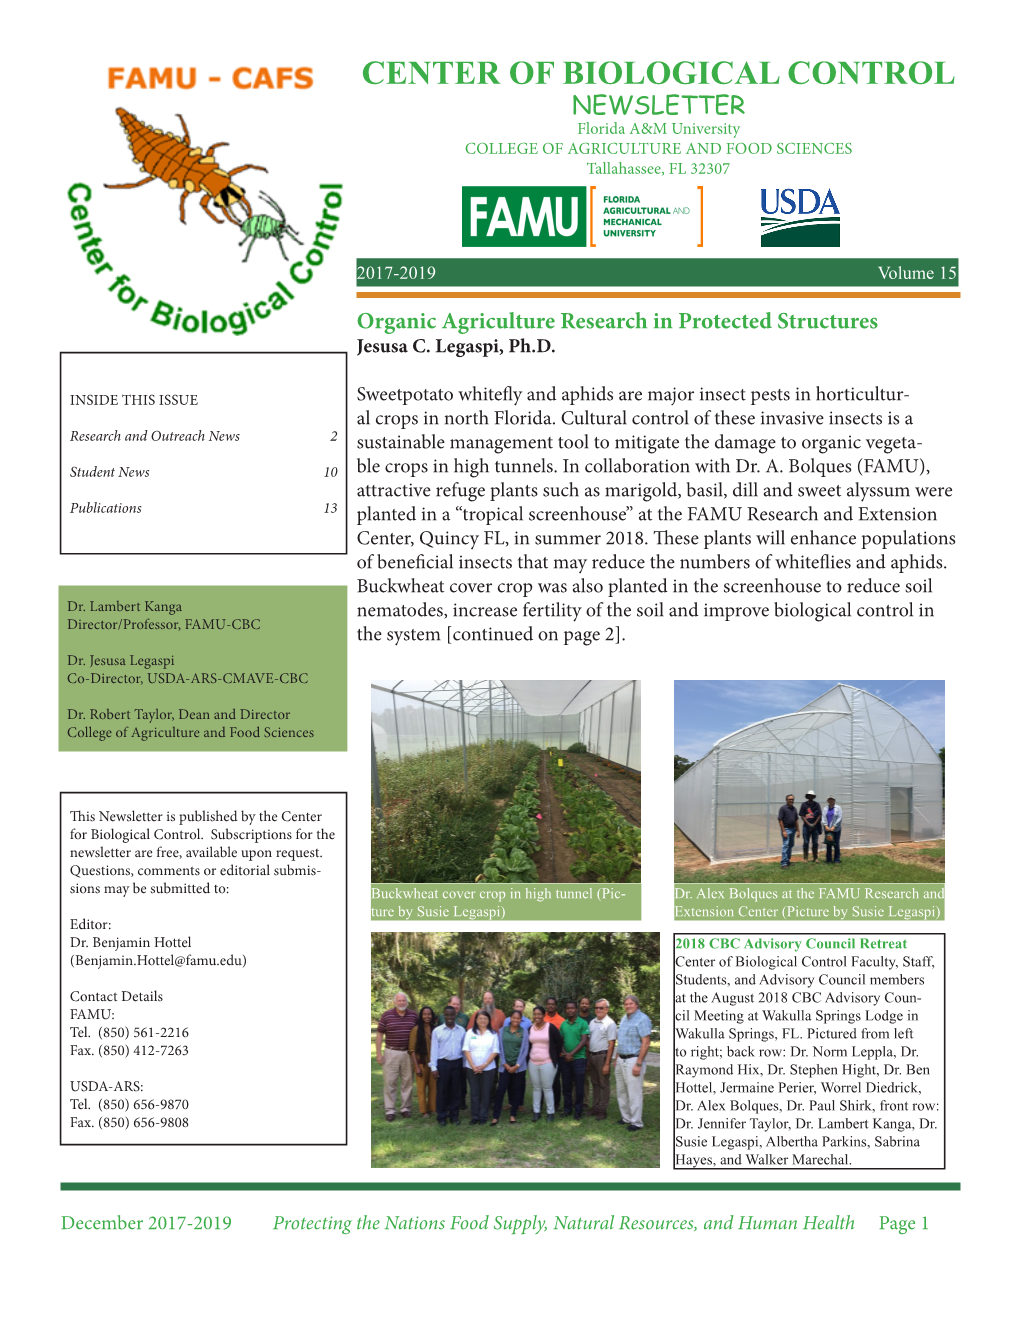 Center of Biological Control Newsletter Florida A&M University College of Agriculture and Food Sciences Tallahassee, FL 32307